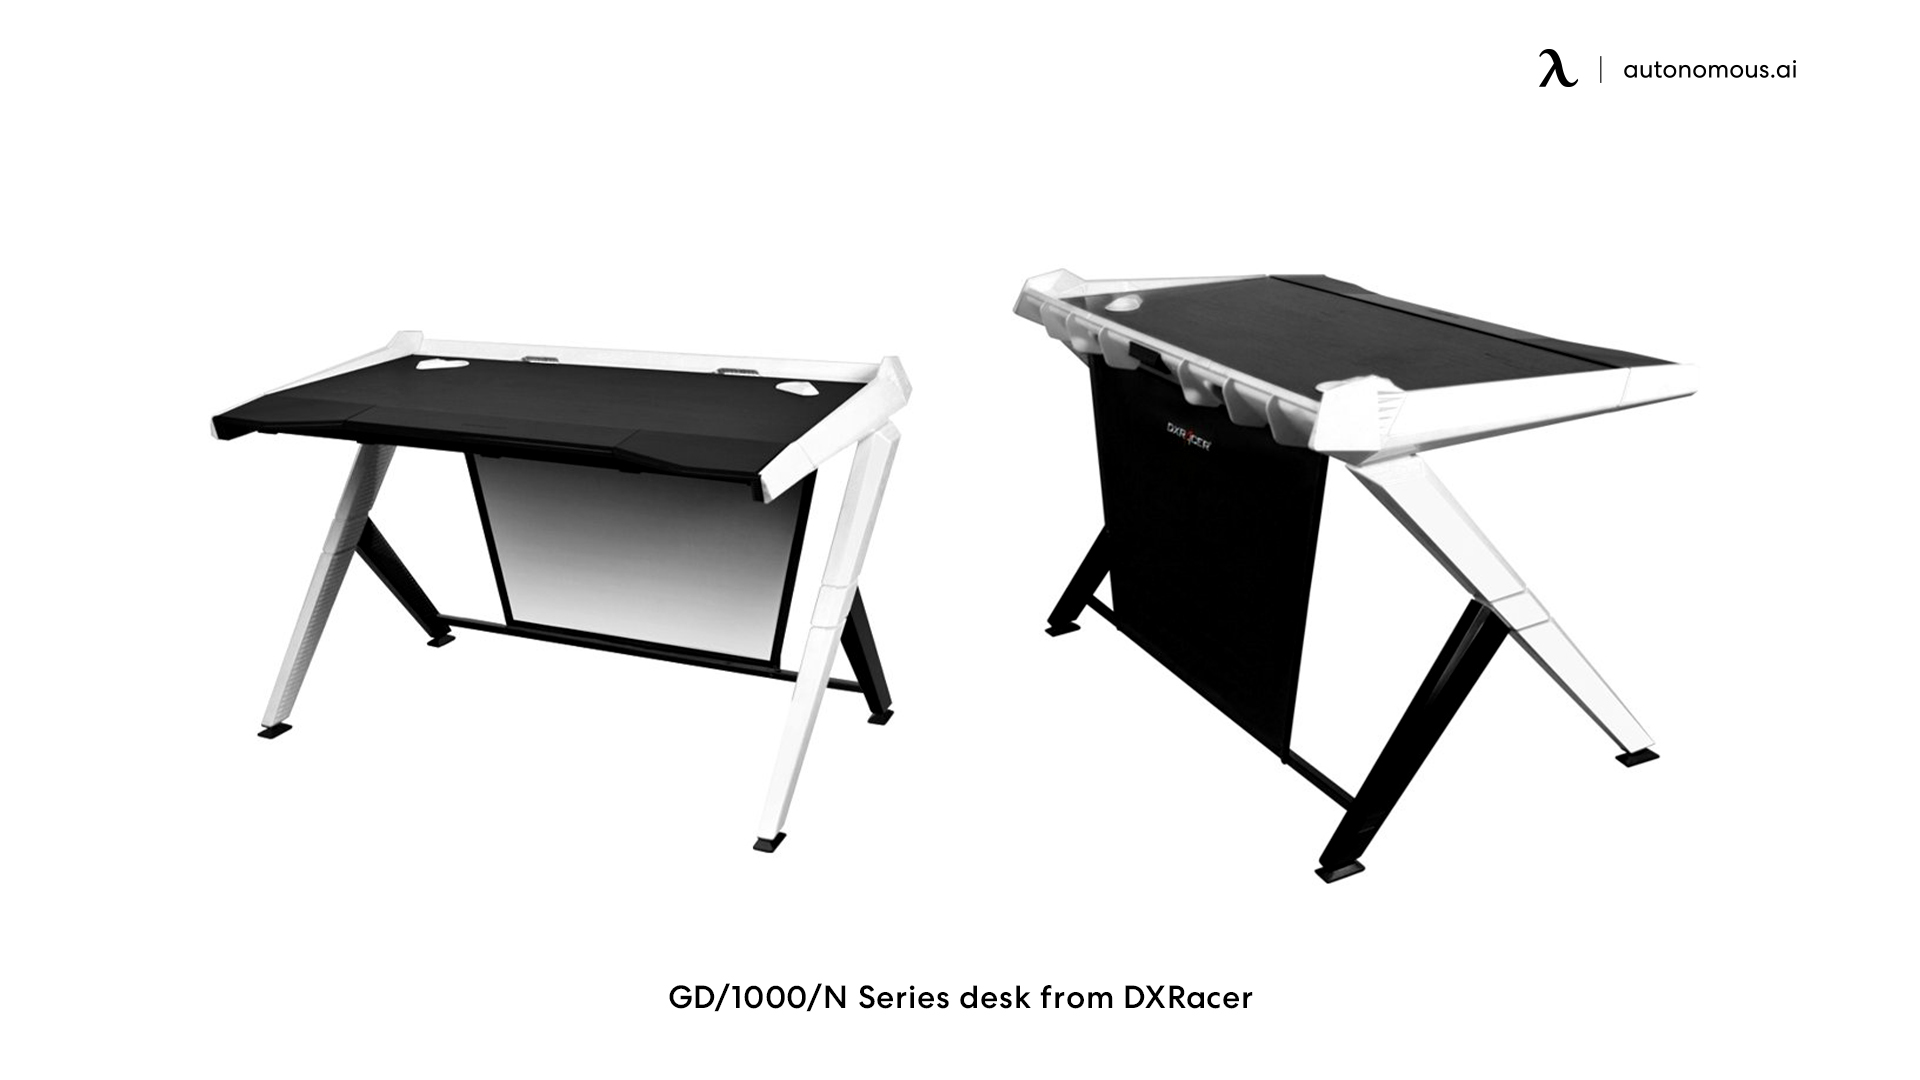 GD/1000/N Series gaming desk and chair combo